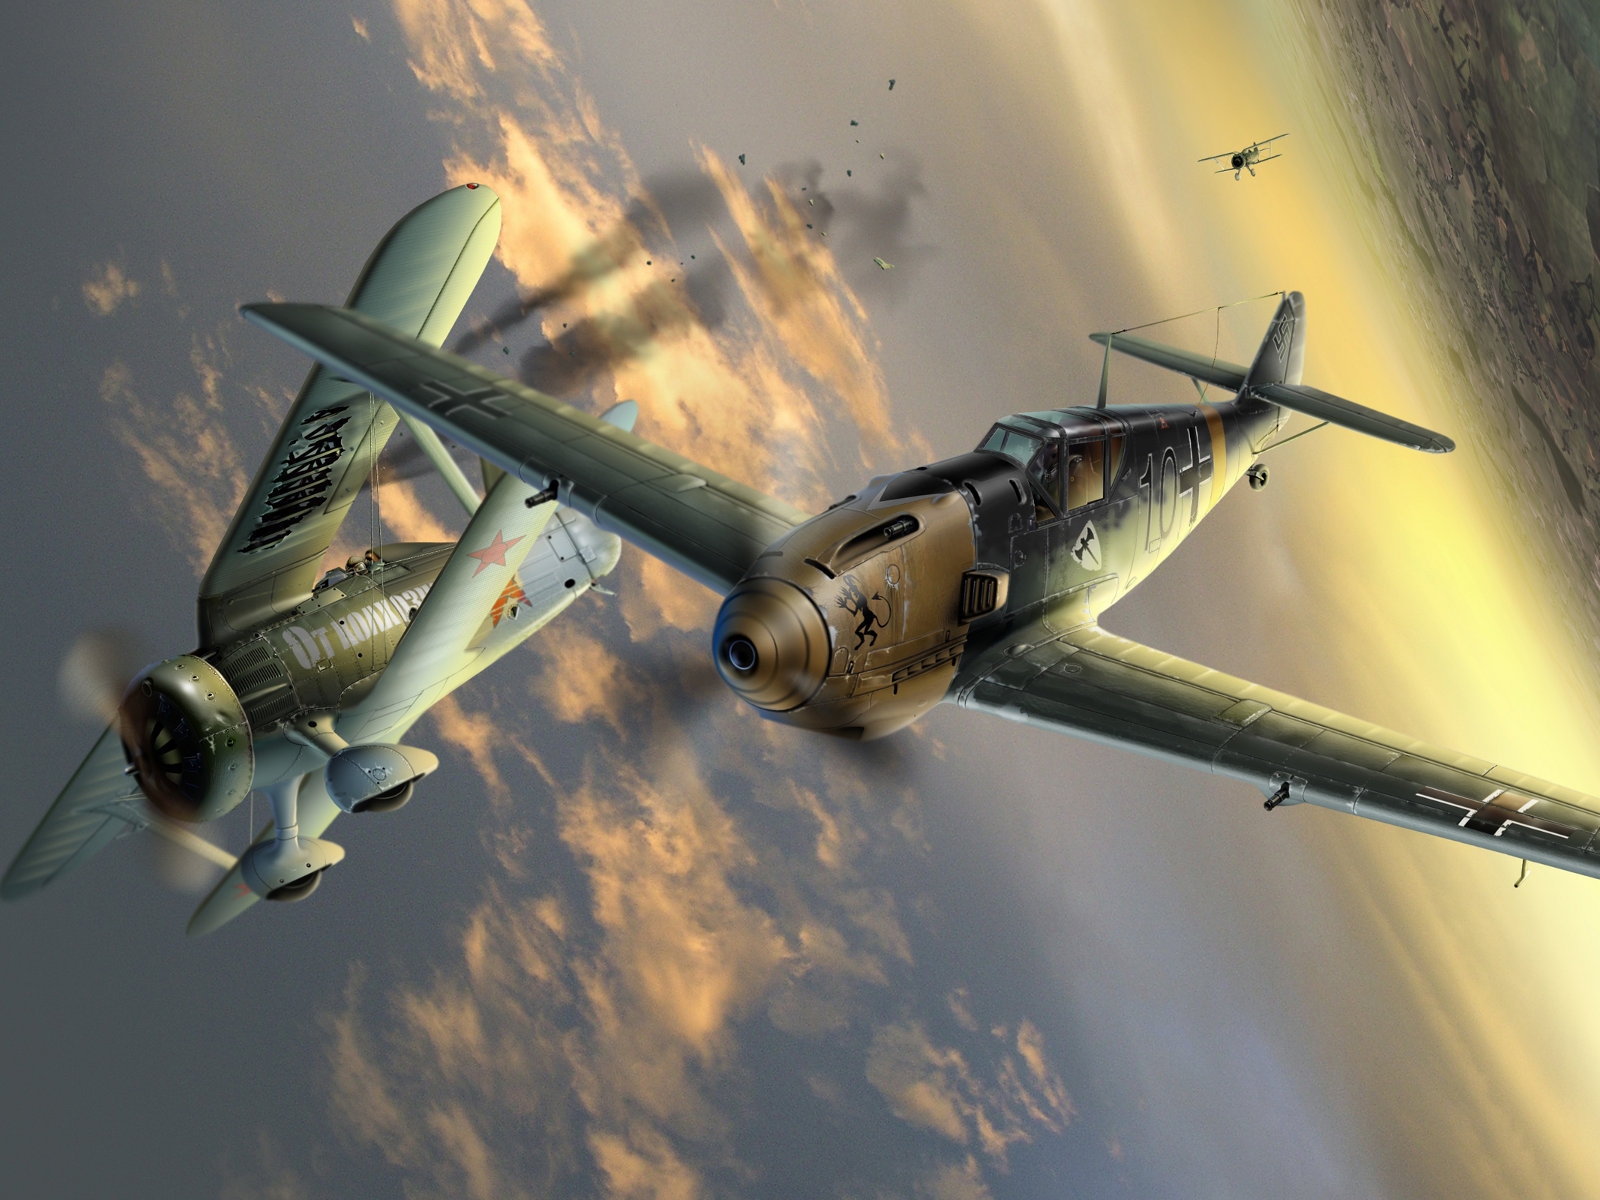 Me 109 War II Fighter Aircraft for 1600 x 1200 resolution